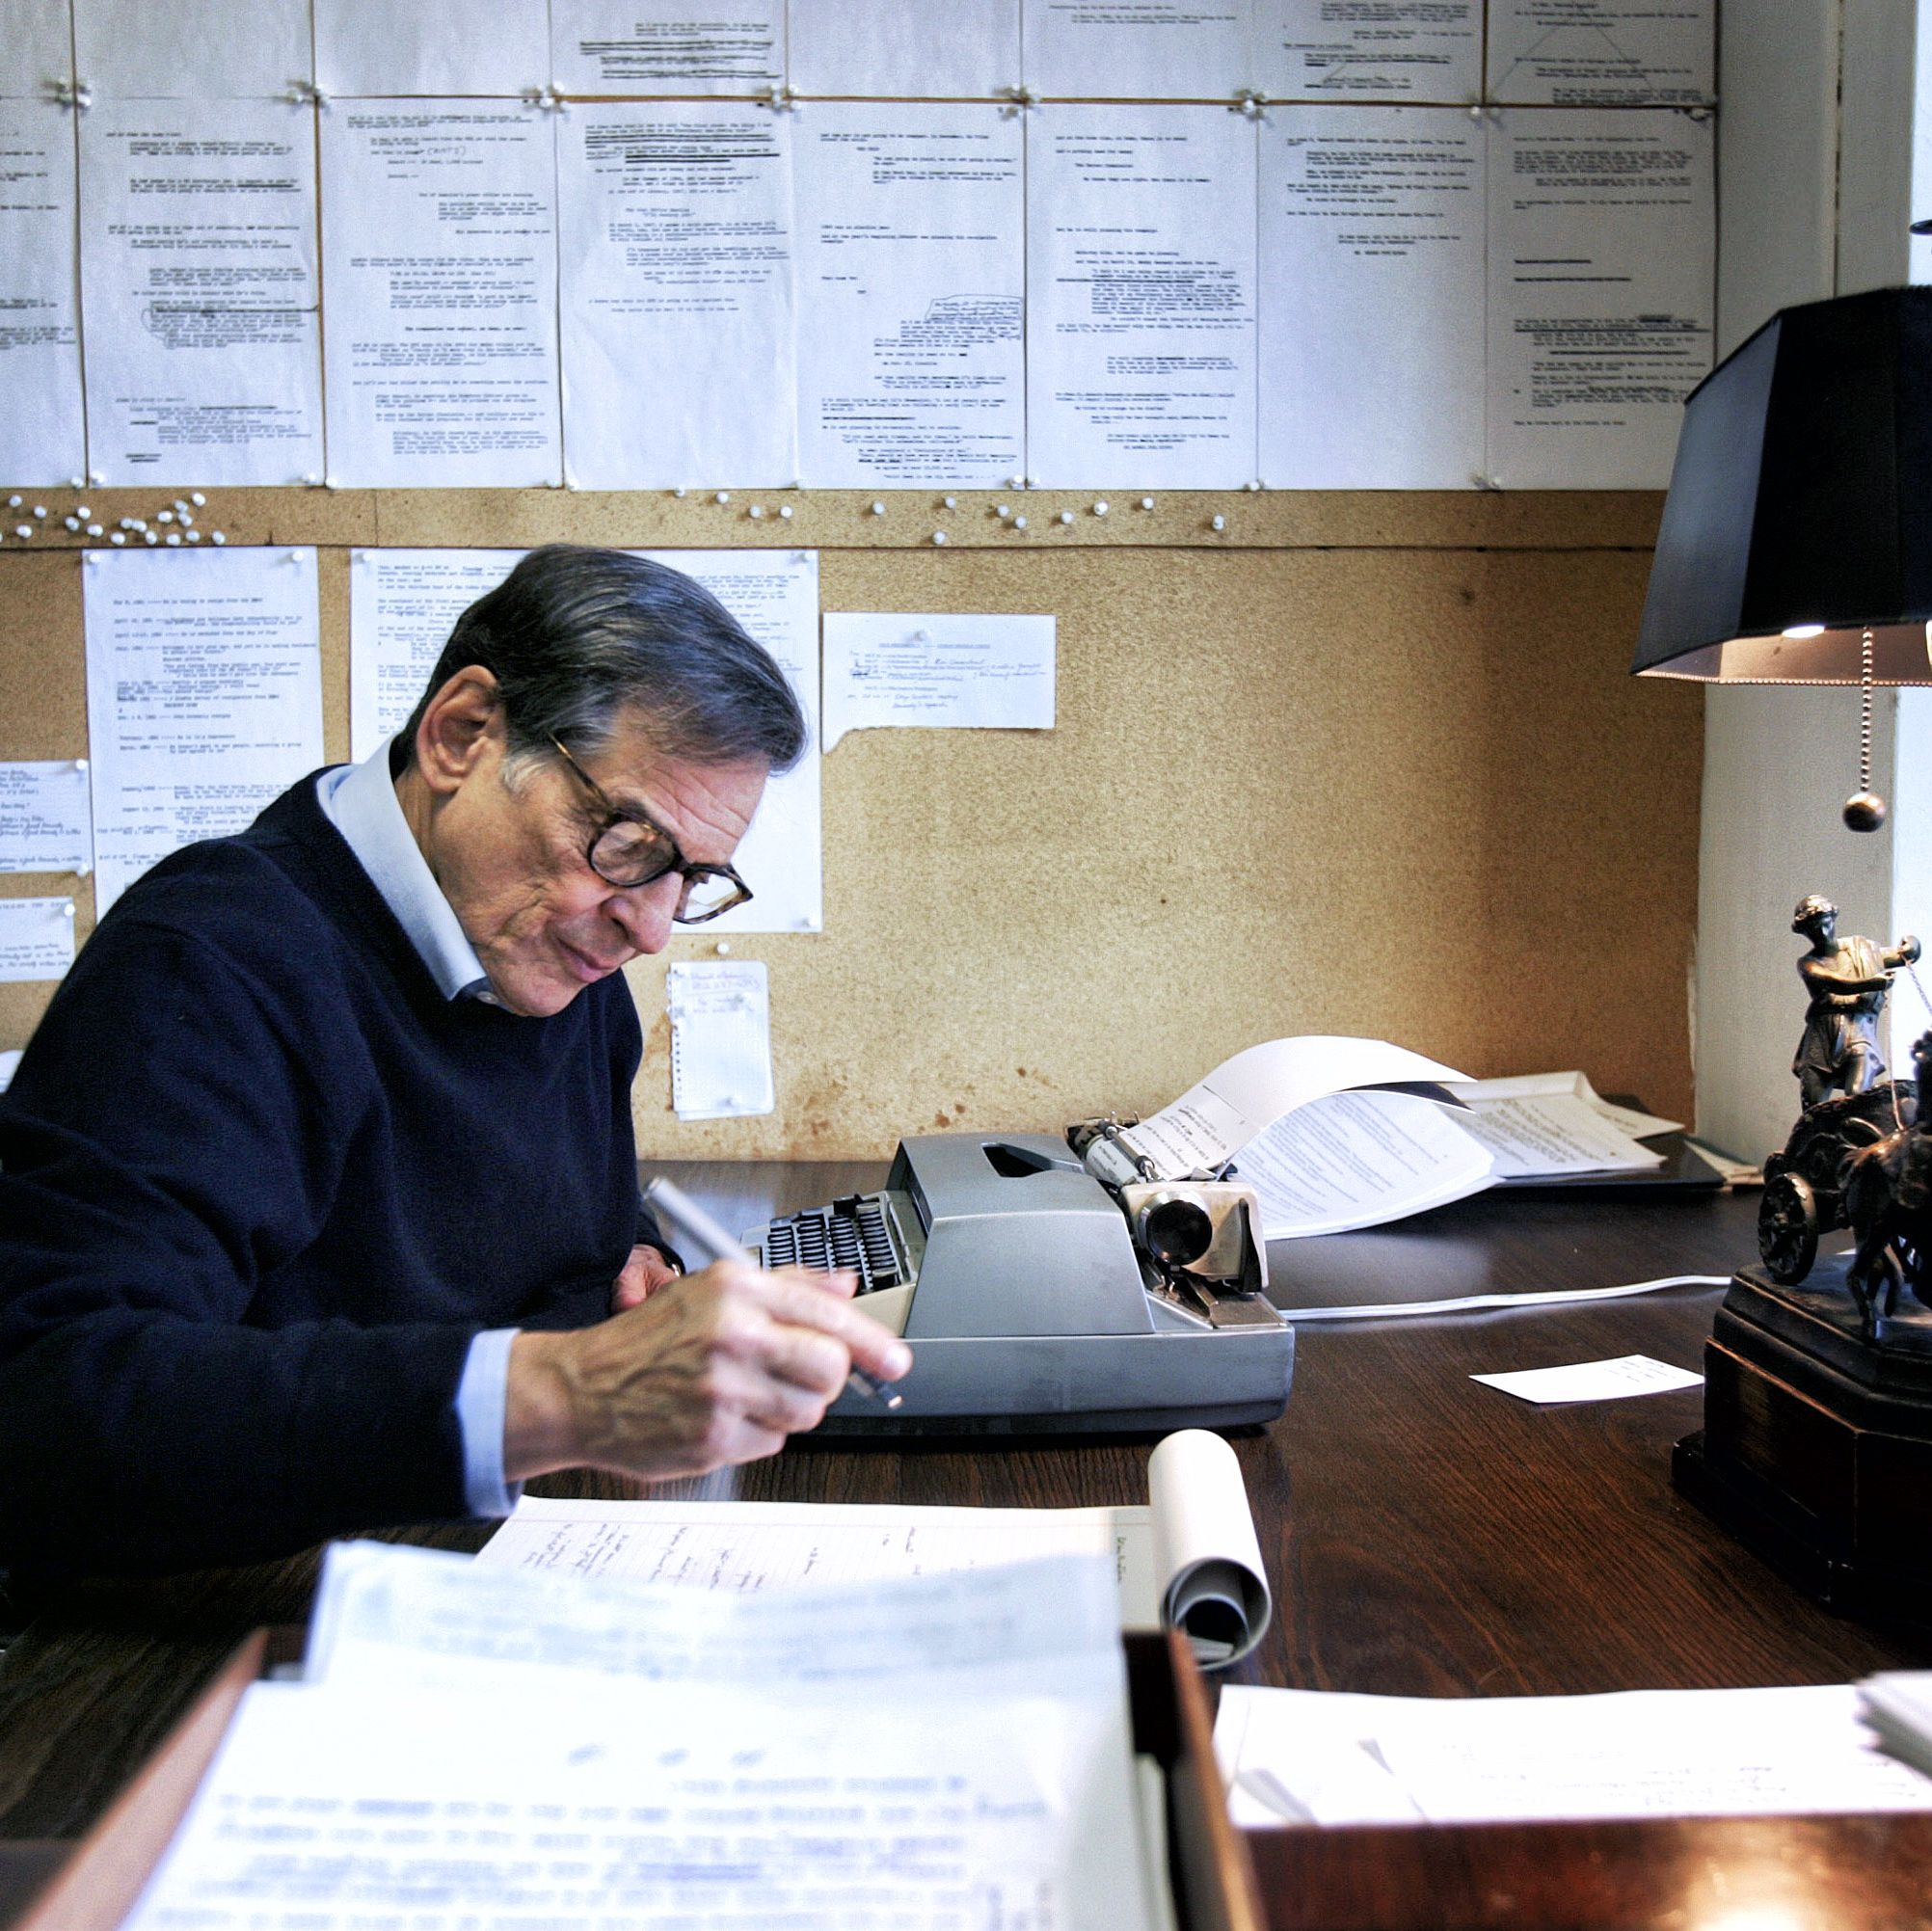 Robert Caro on the Importance of Analog Research in a Digital Age